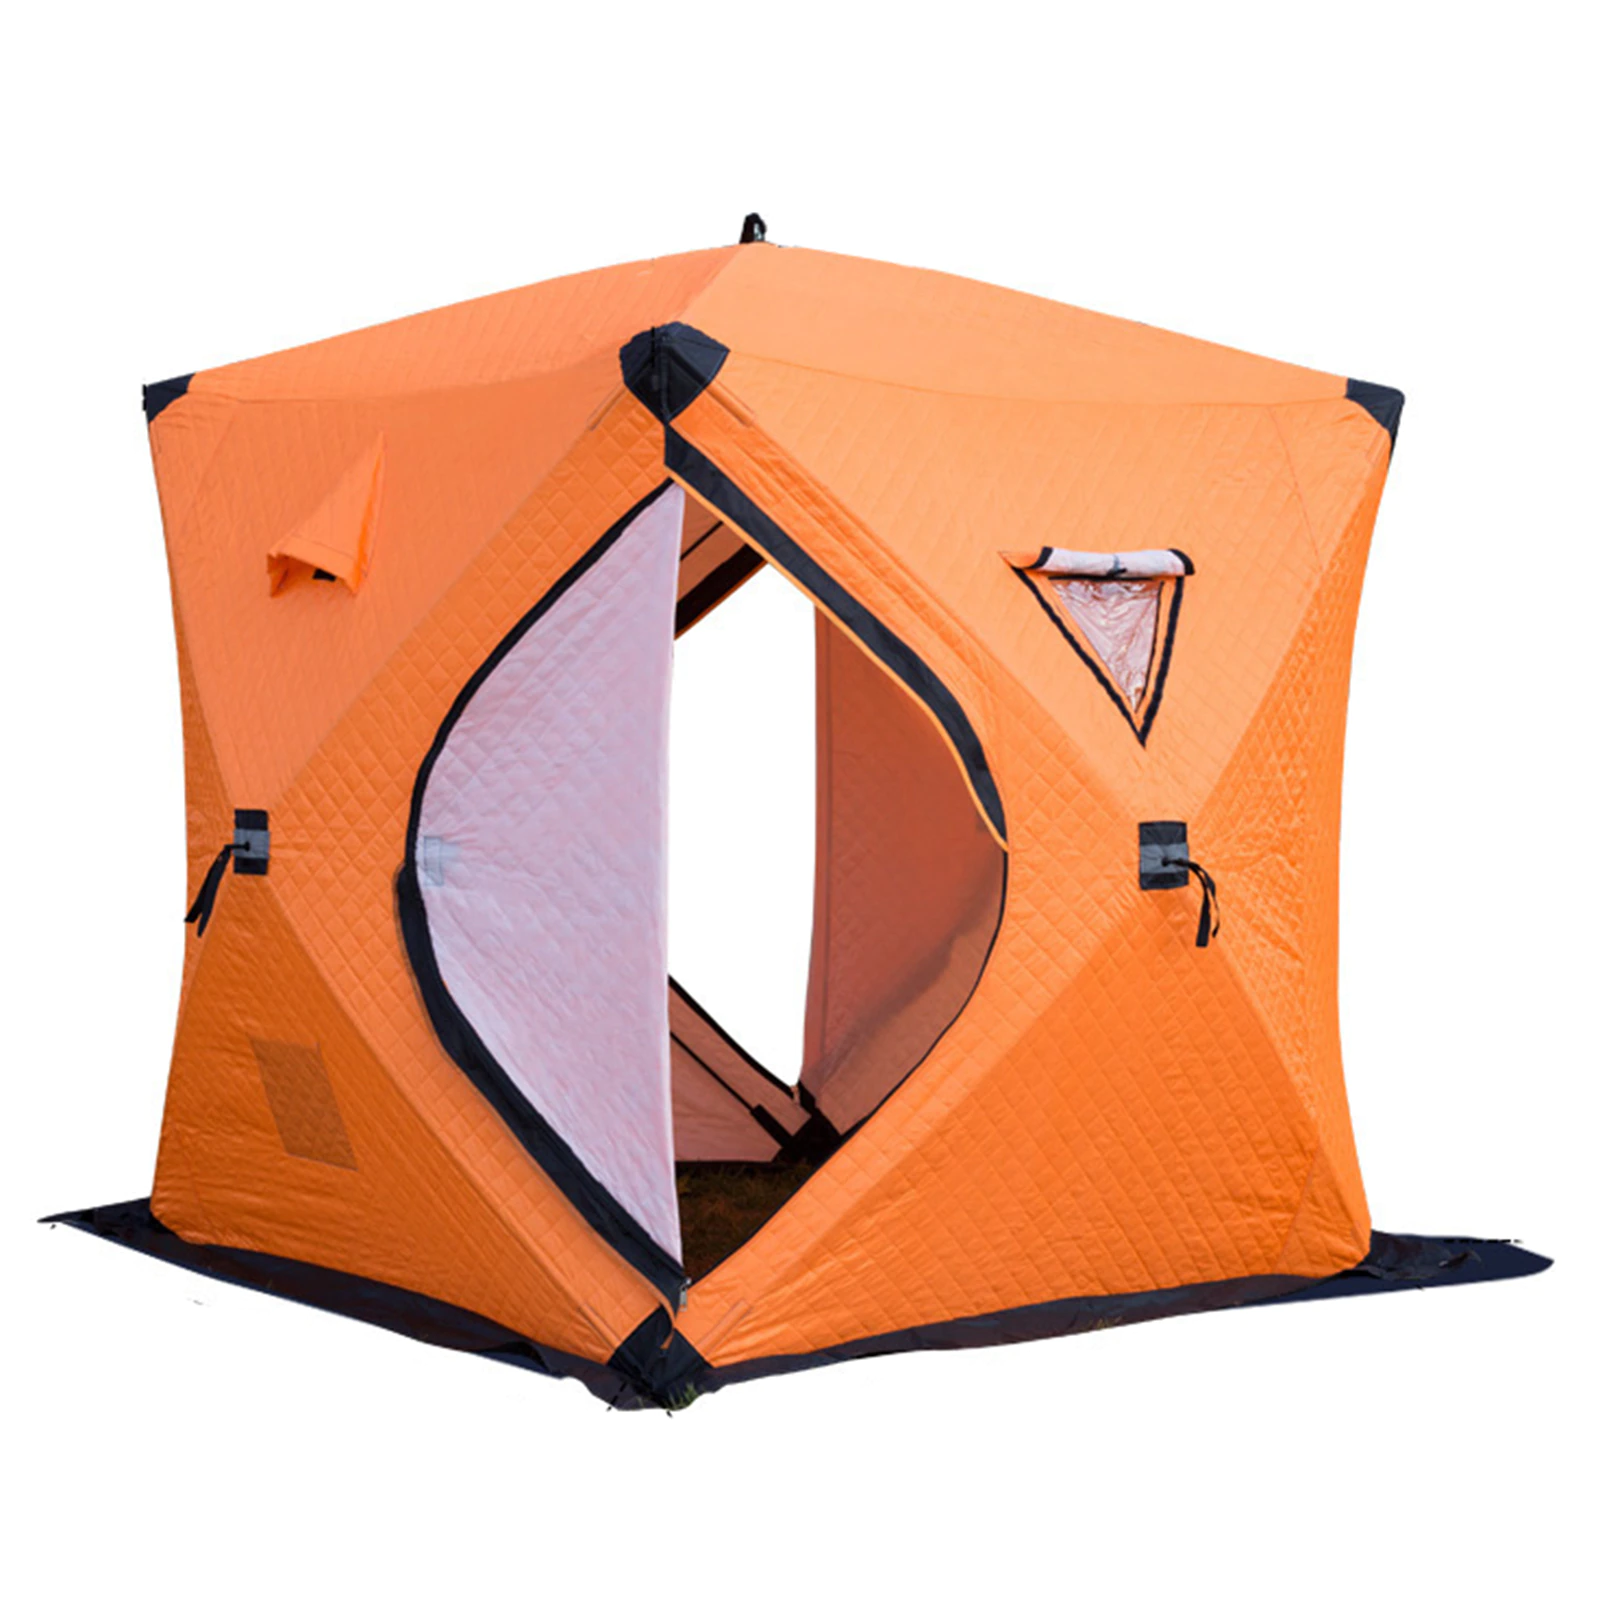 Cheap Goat Tents Camping Tent Ice Fishing Shelter High Quality Easy Set